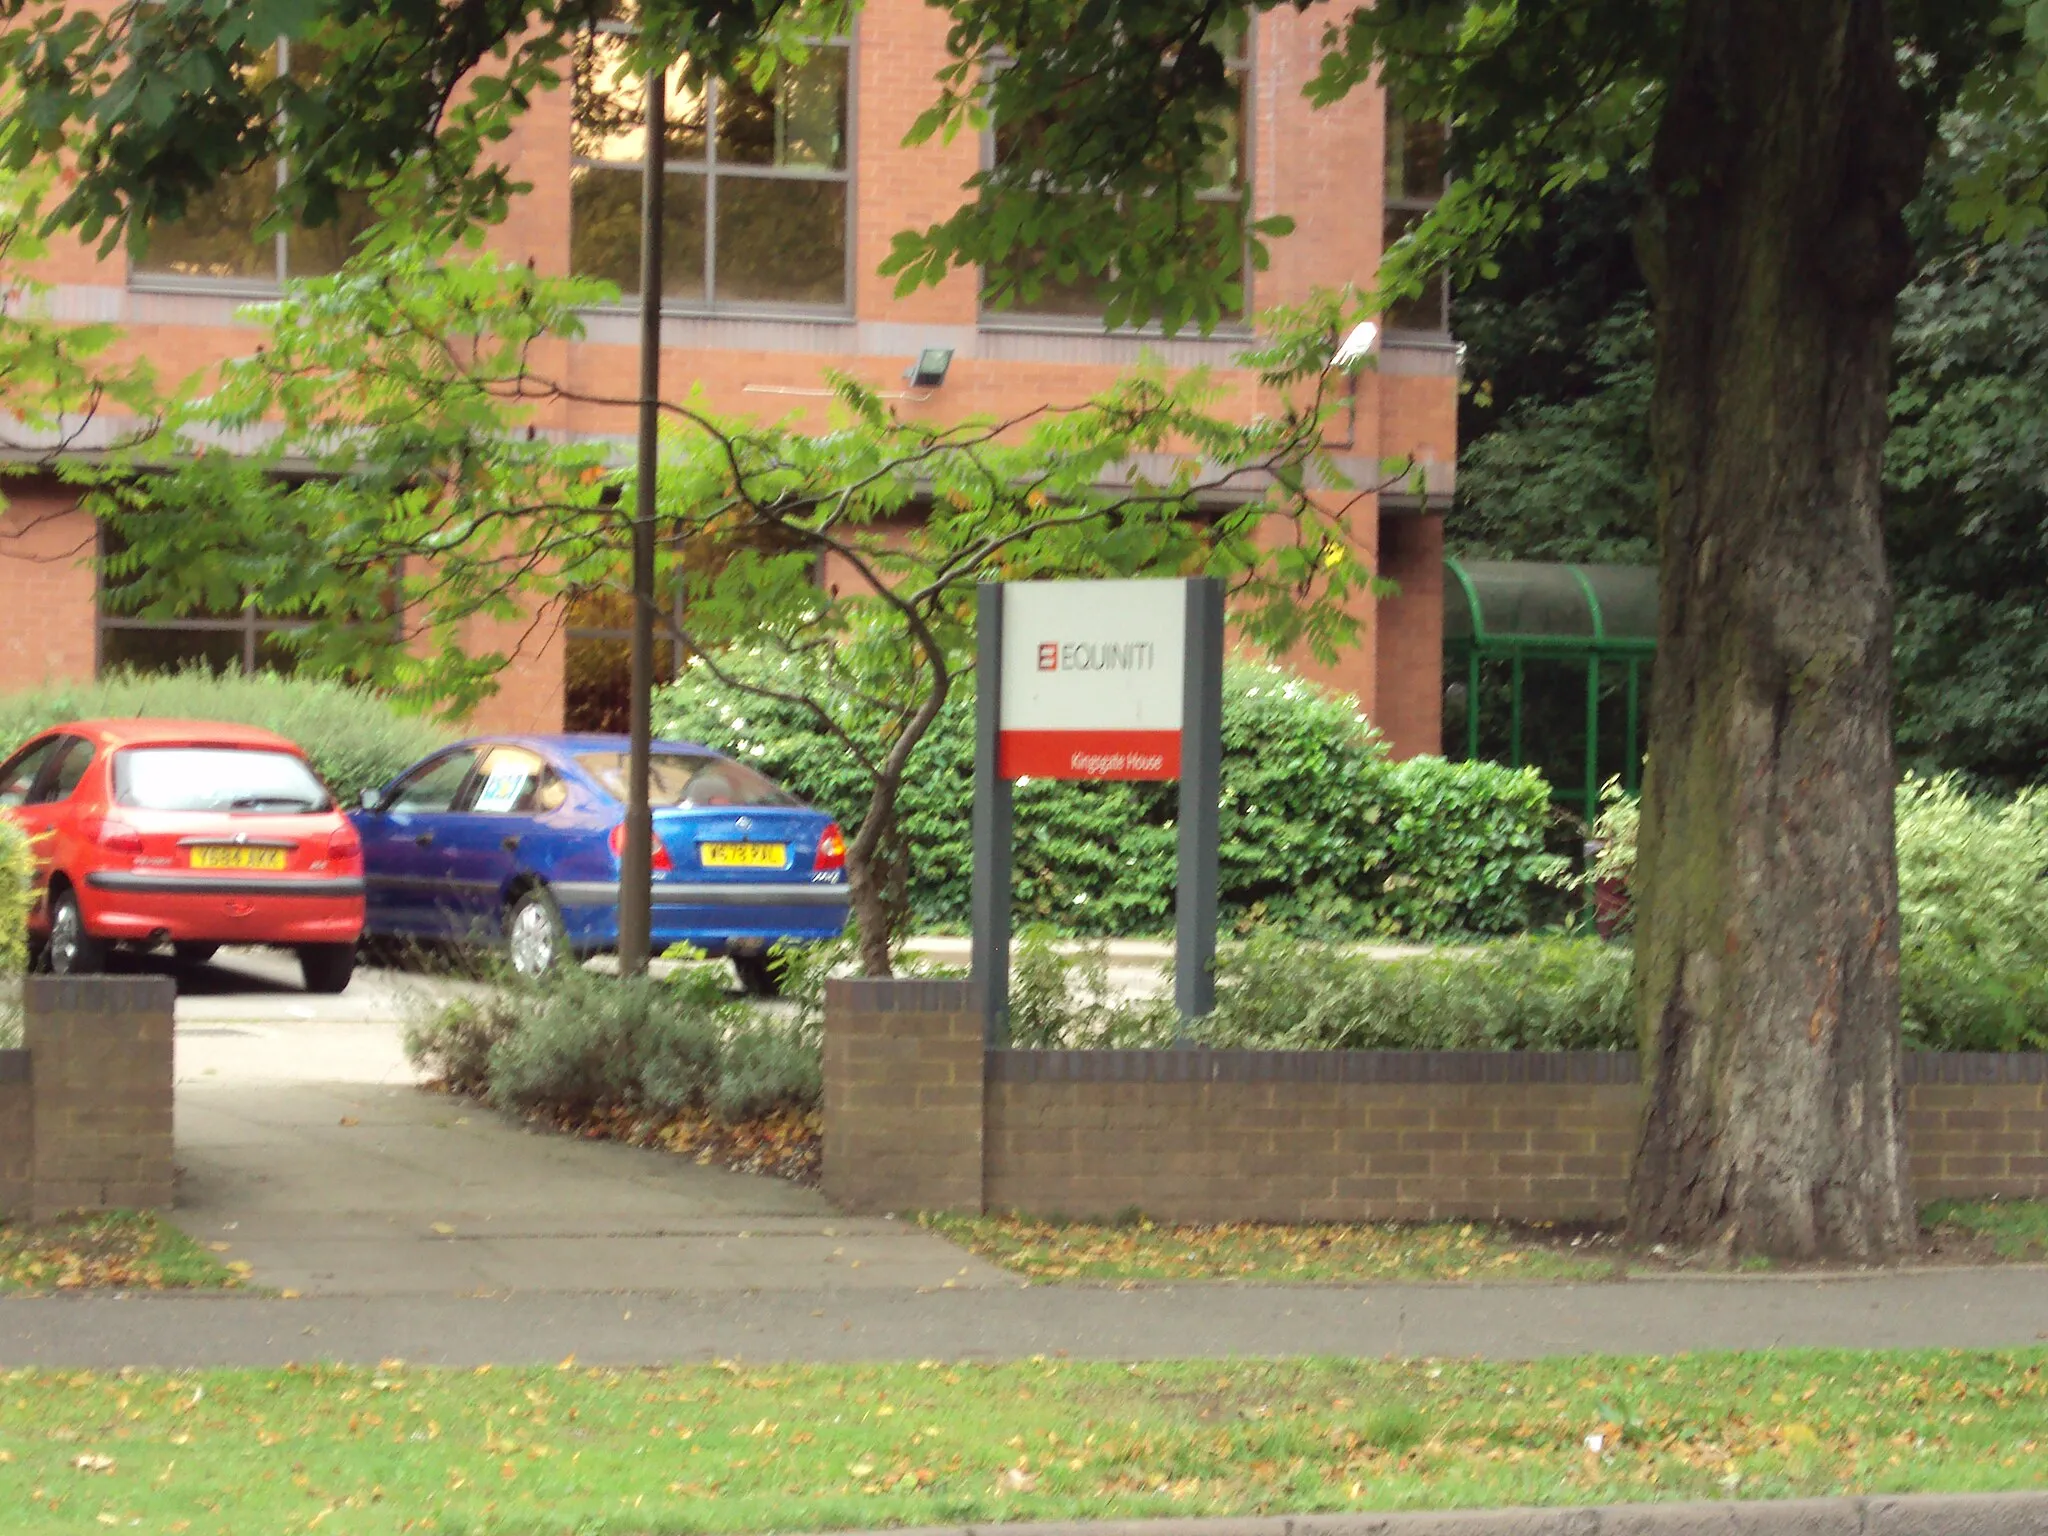 Photo showing: Offices of Equiniti, Pershore Road South, Kings Norton, Birmingham, England.